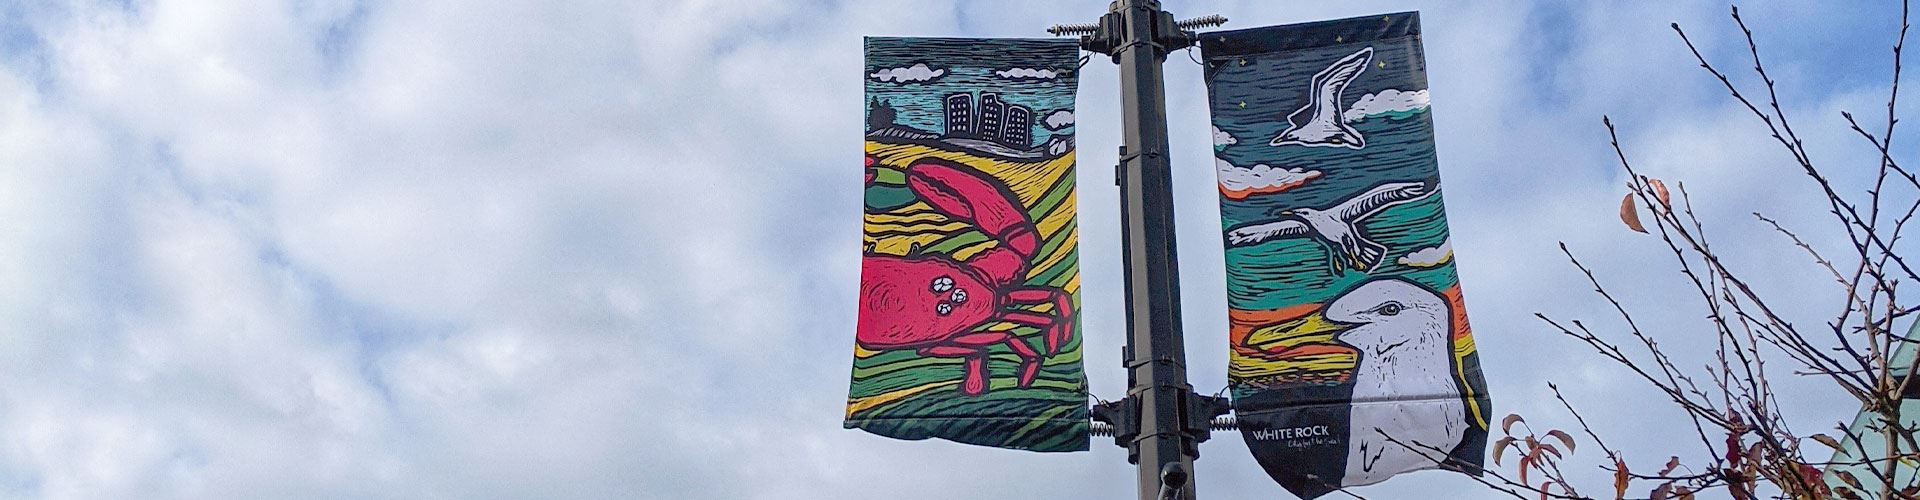 Street banners on lamp posts, art of sea gull and pink crab